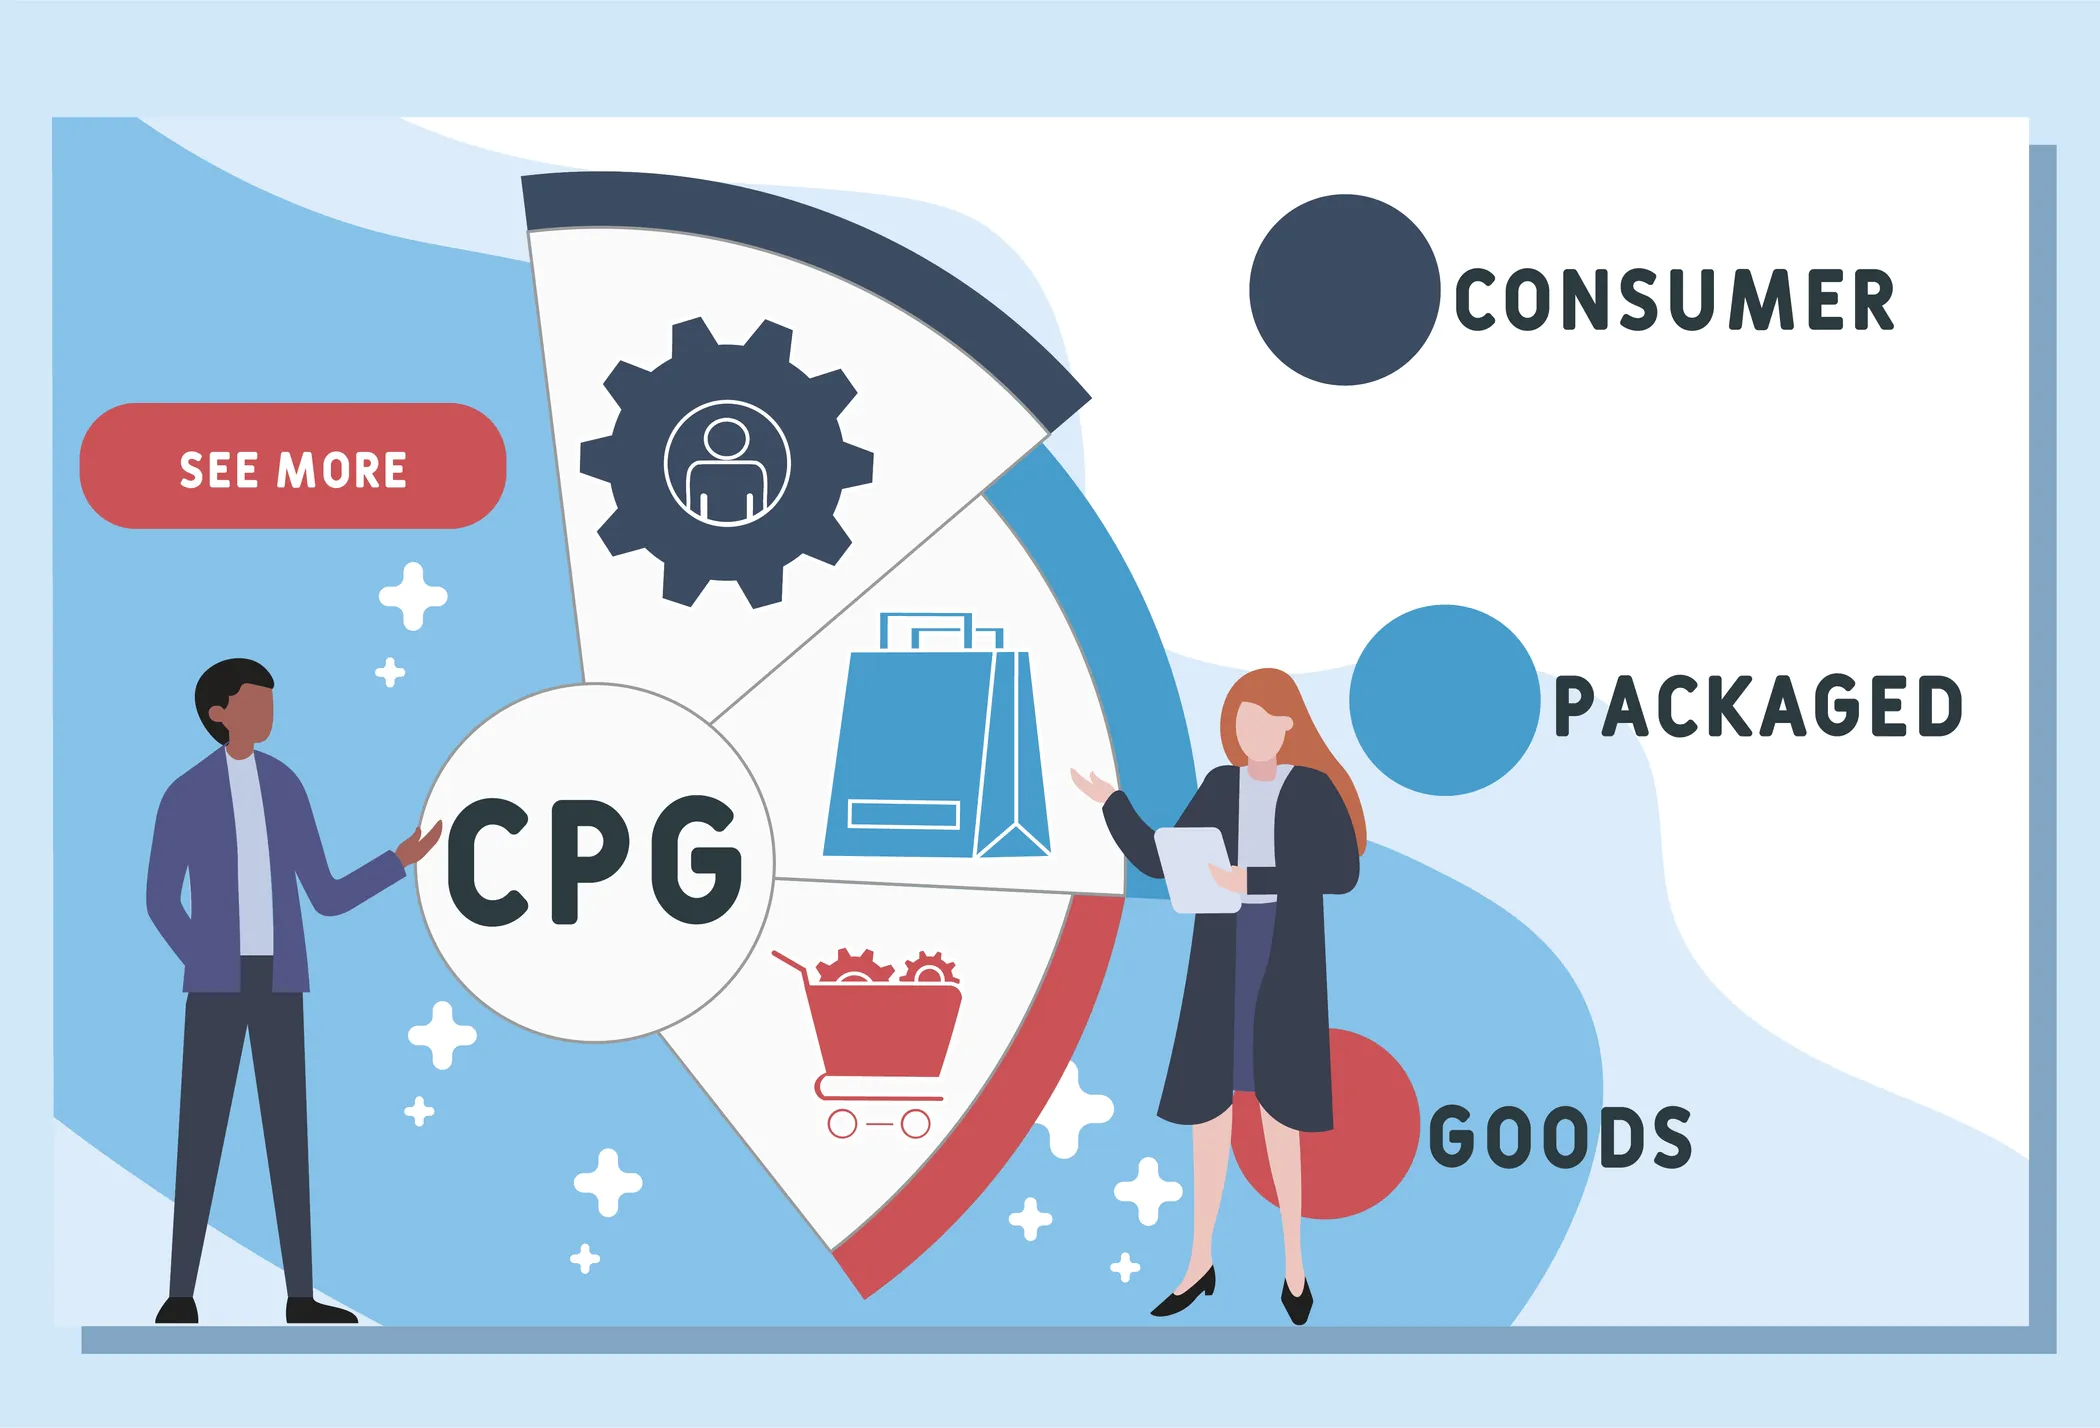 CPG Contract Manufacturing: A Top CPG Firm Identifies Optimal CPG Contract Manufacturers with SpendEdge Solutions